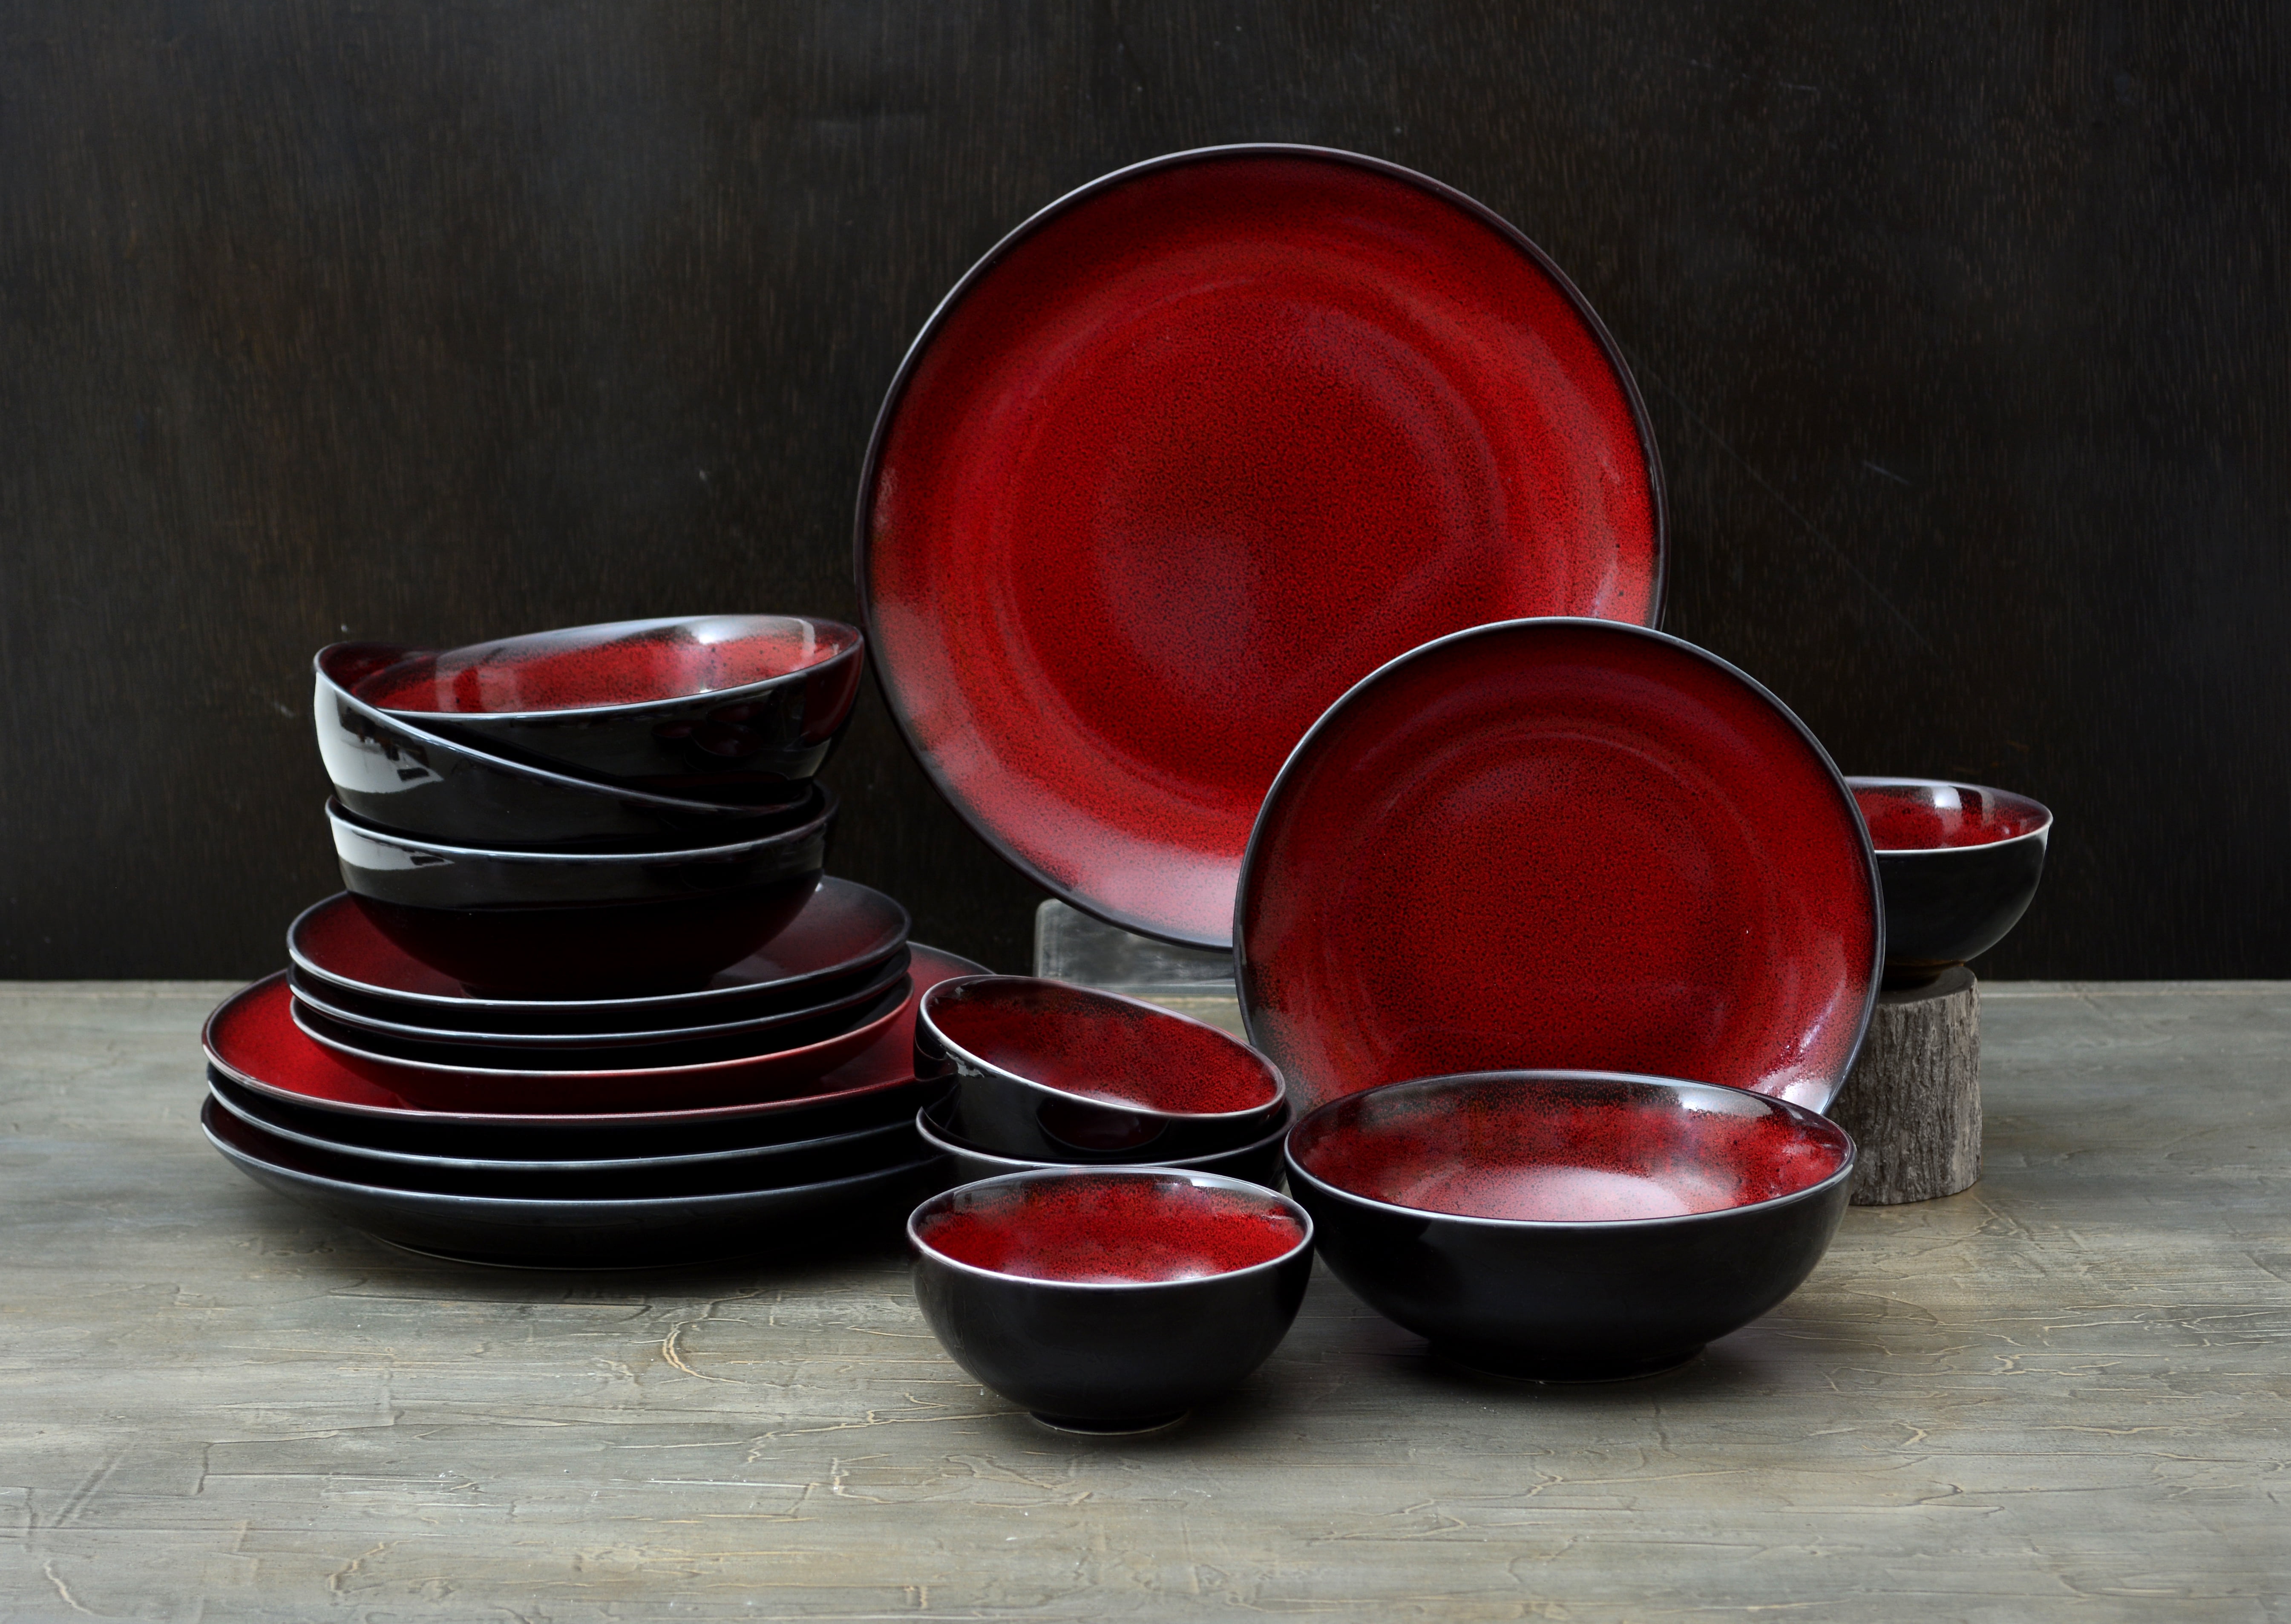 4 pcs Sauce Dishes Red and Black Durable Round Food Dipping Bowls for Restaurant 